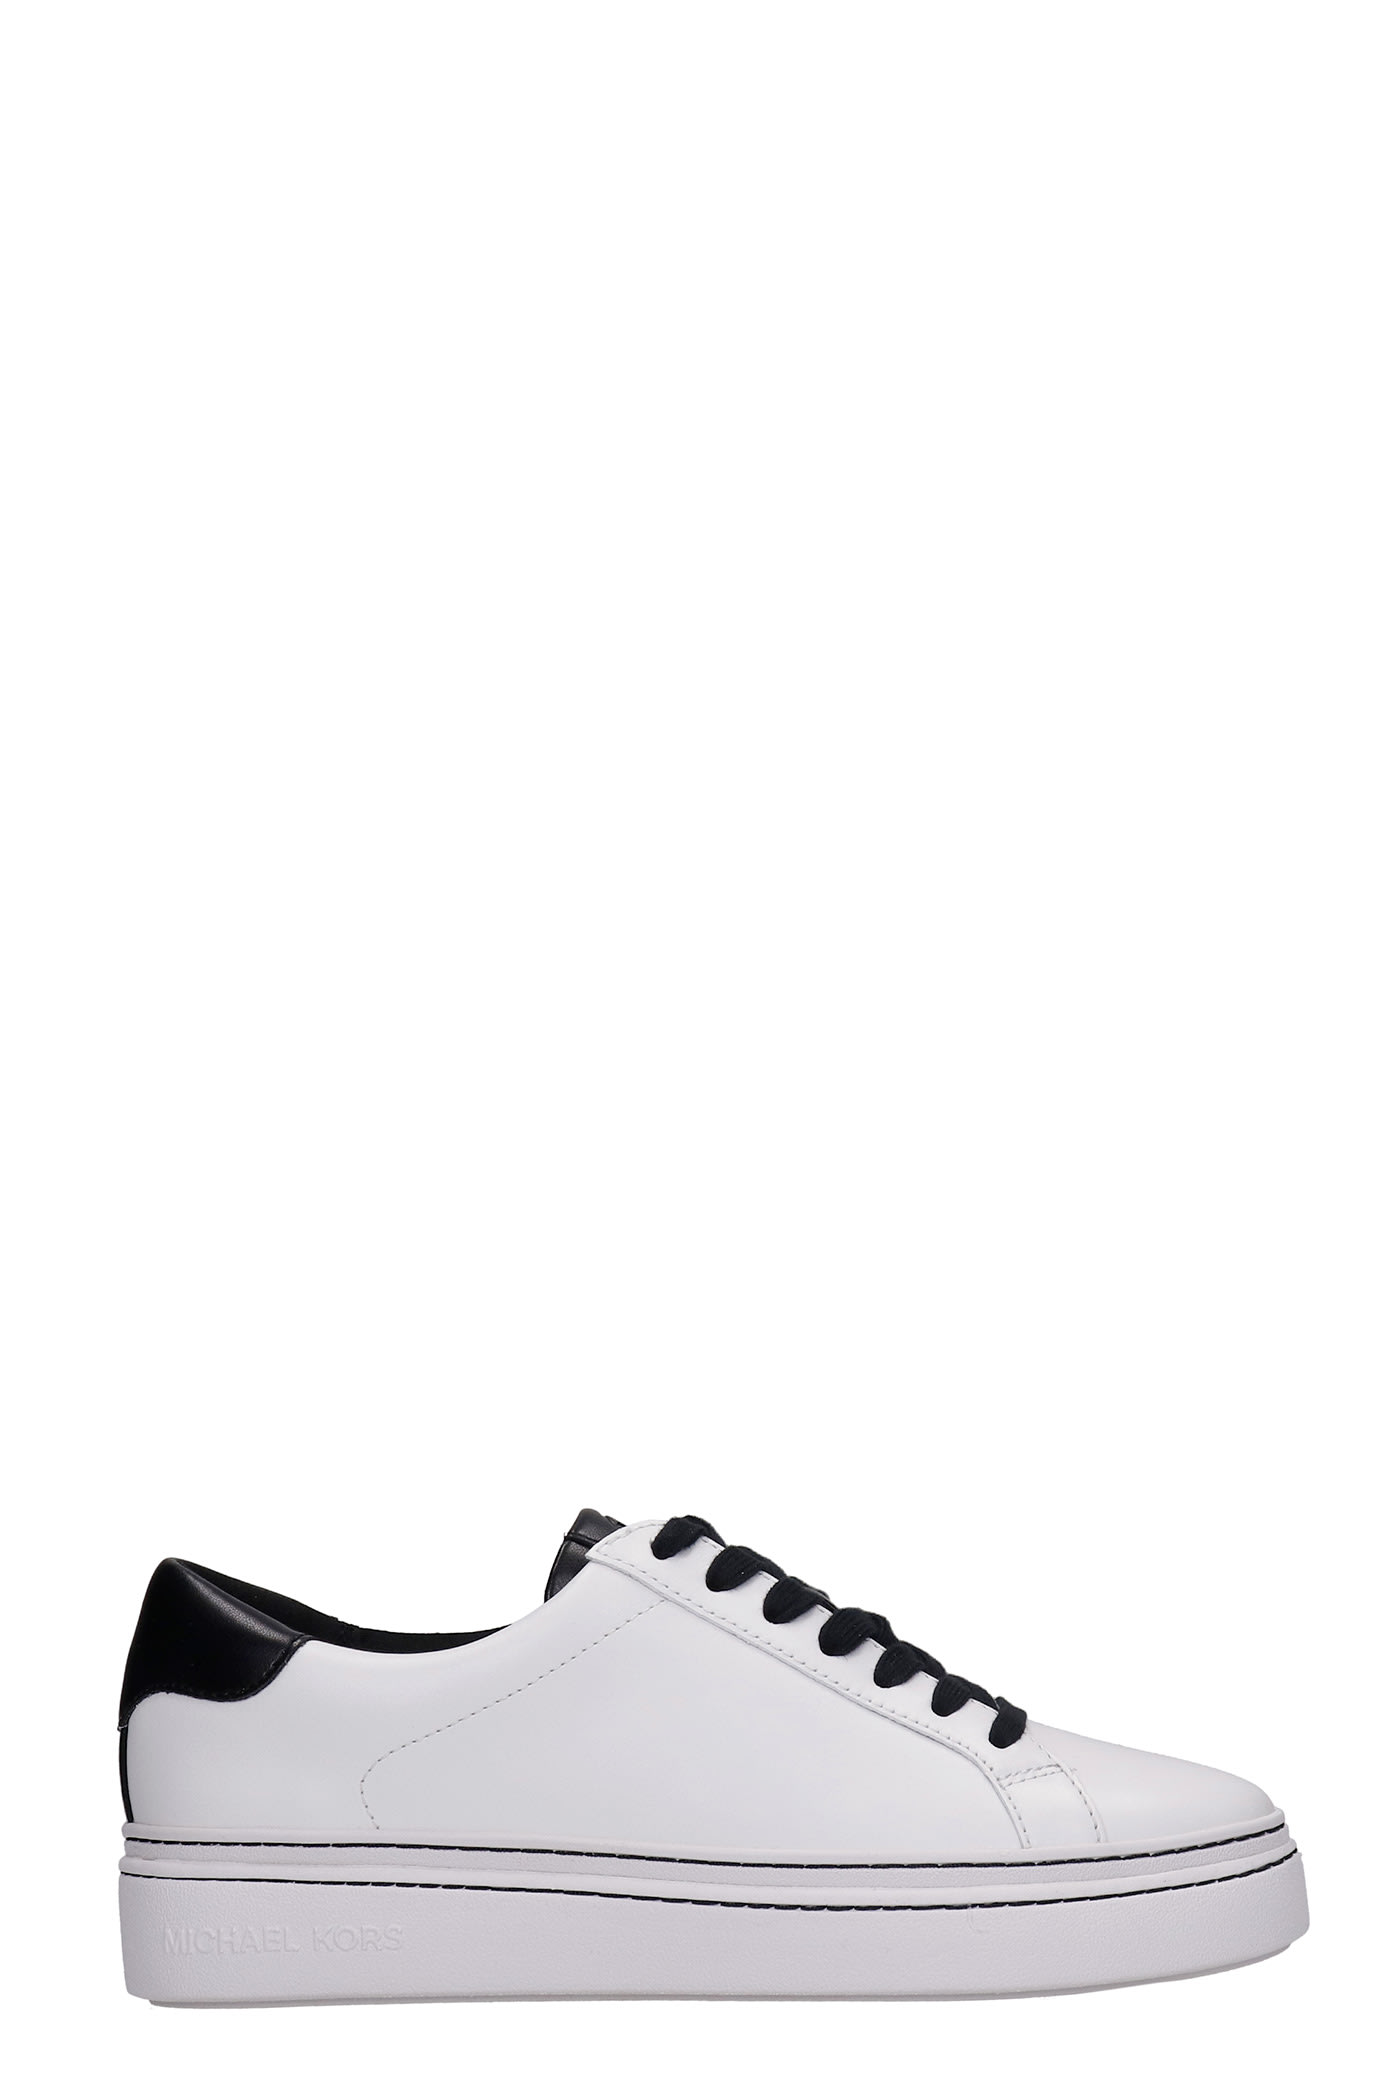 Michael Kors Chapman Sneakers In White Leather